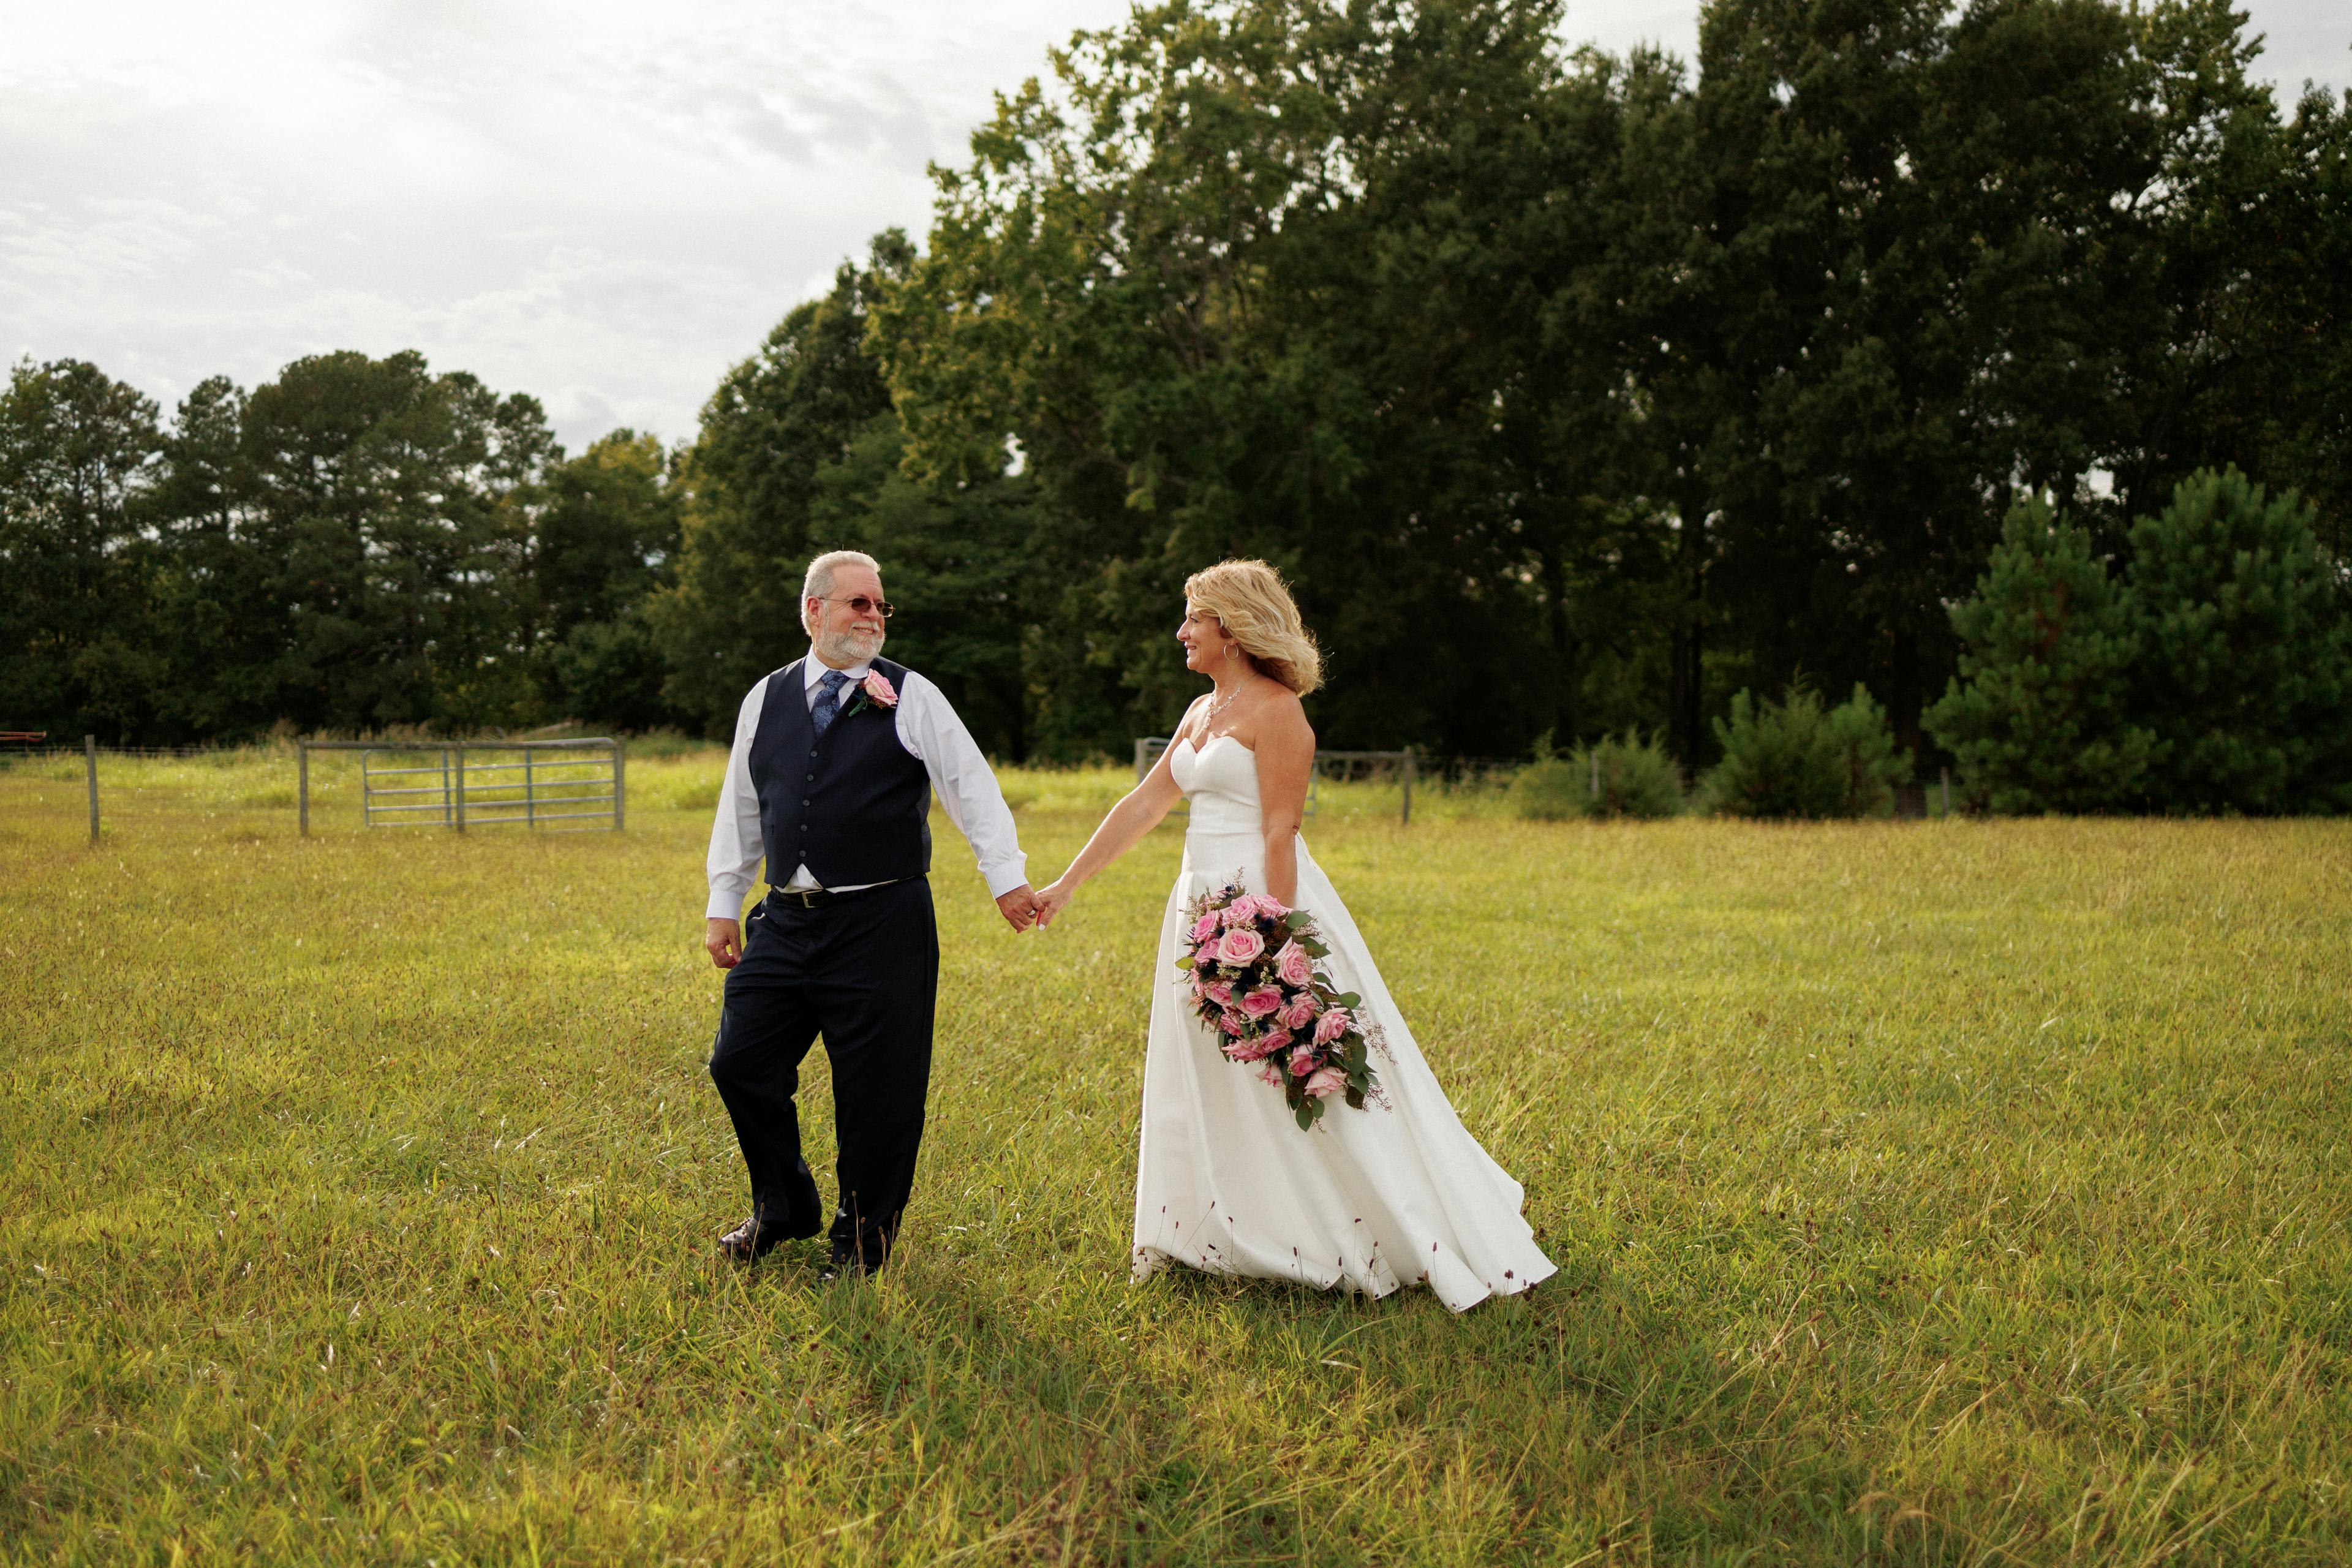 4 hours of wedding day photography coverage 